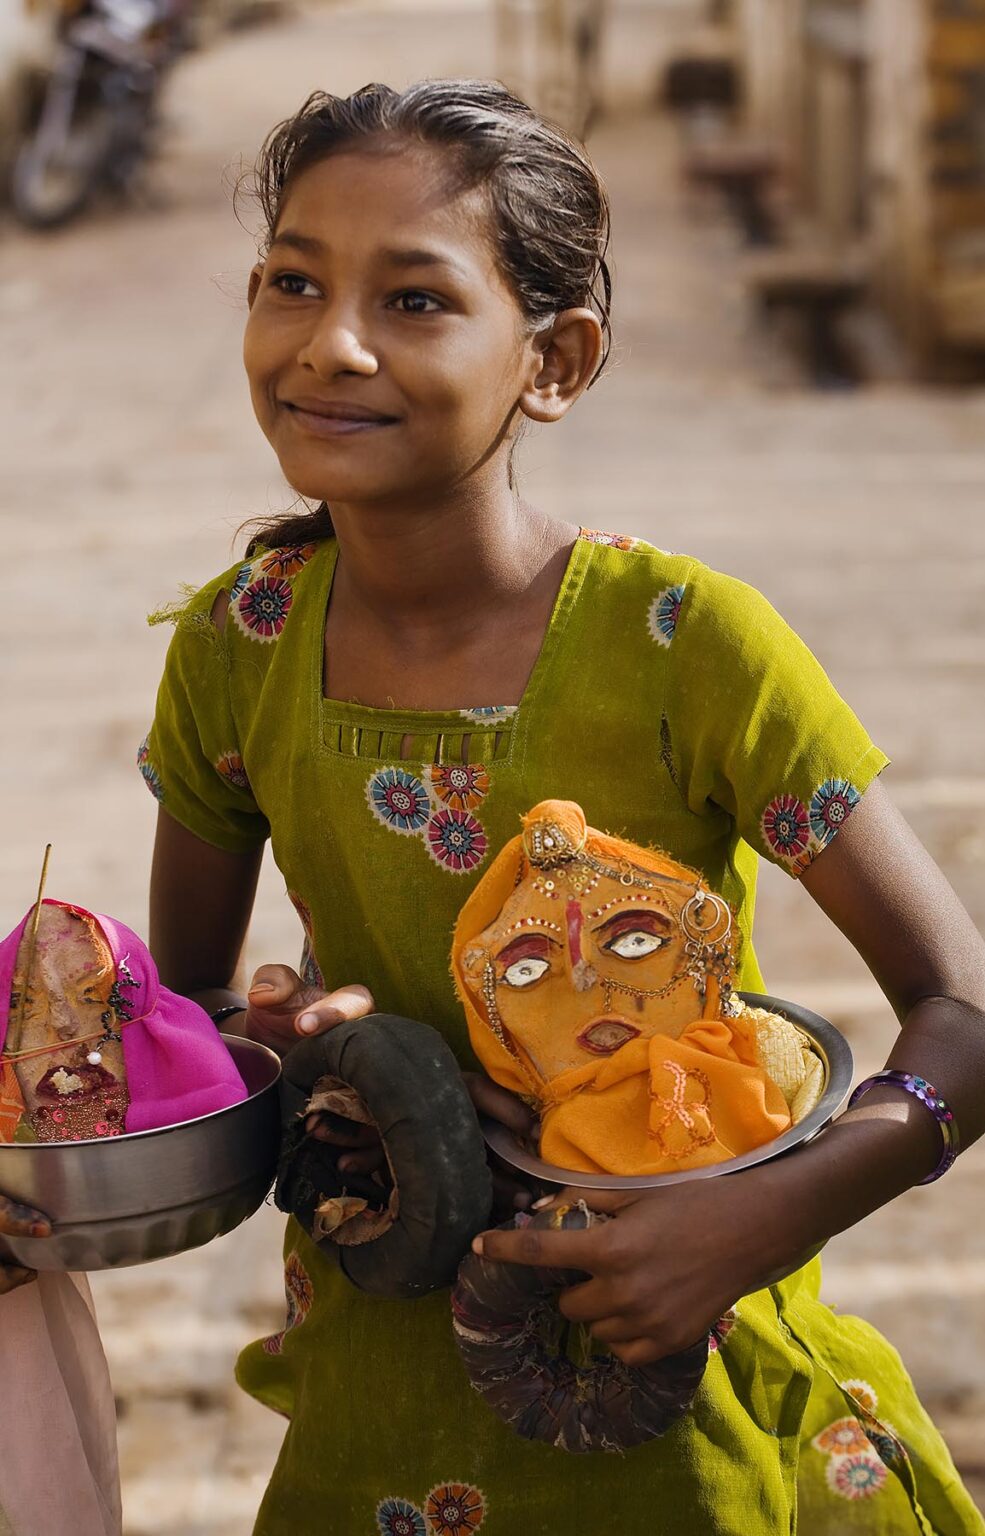 A young GIRL carries effigies of HINDU GODS during the GANGUR FESTIVAL in JAISALMER - RAJASTHAN, INDIA